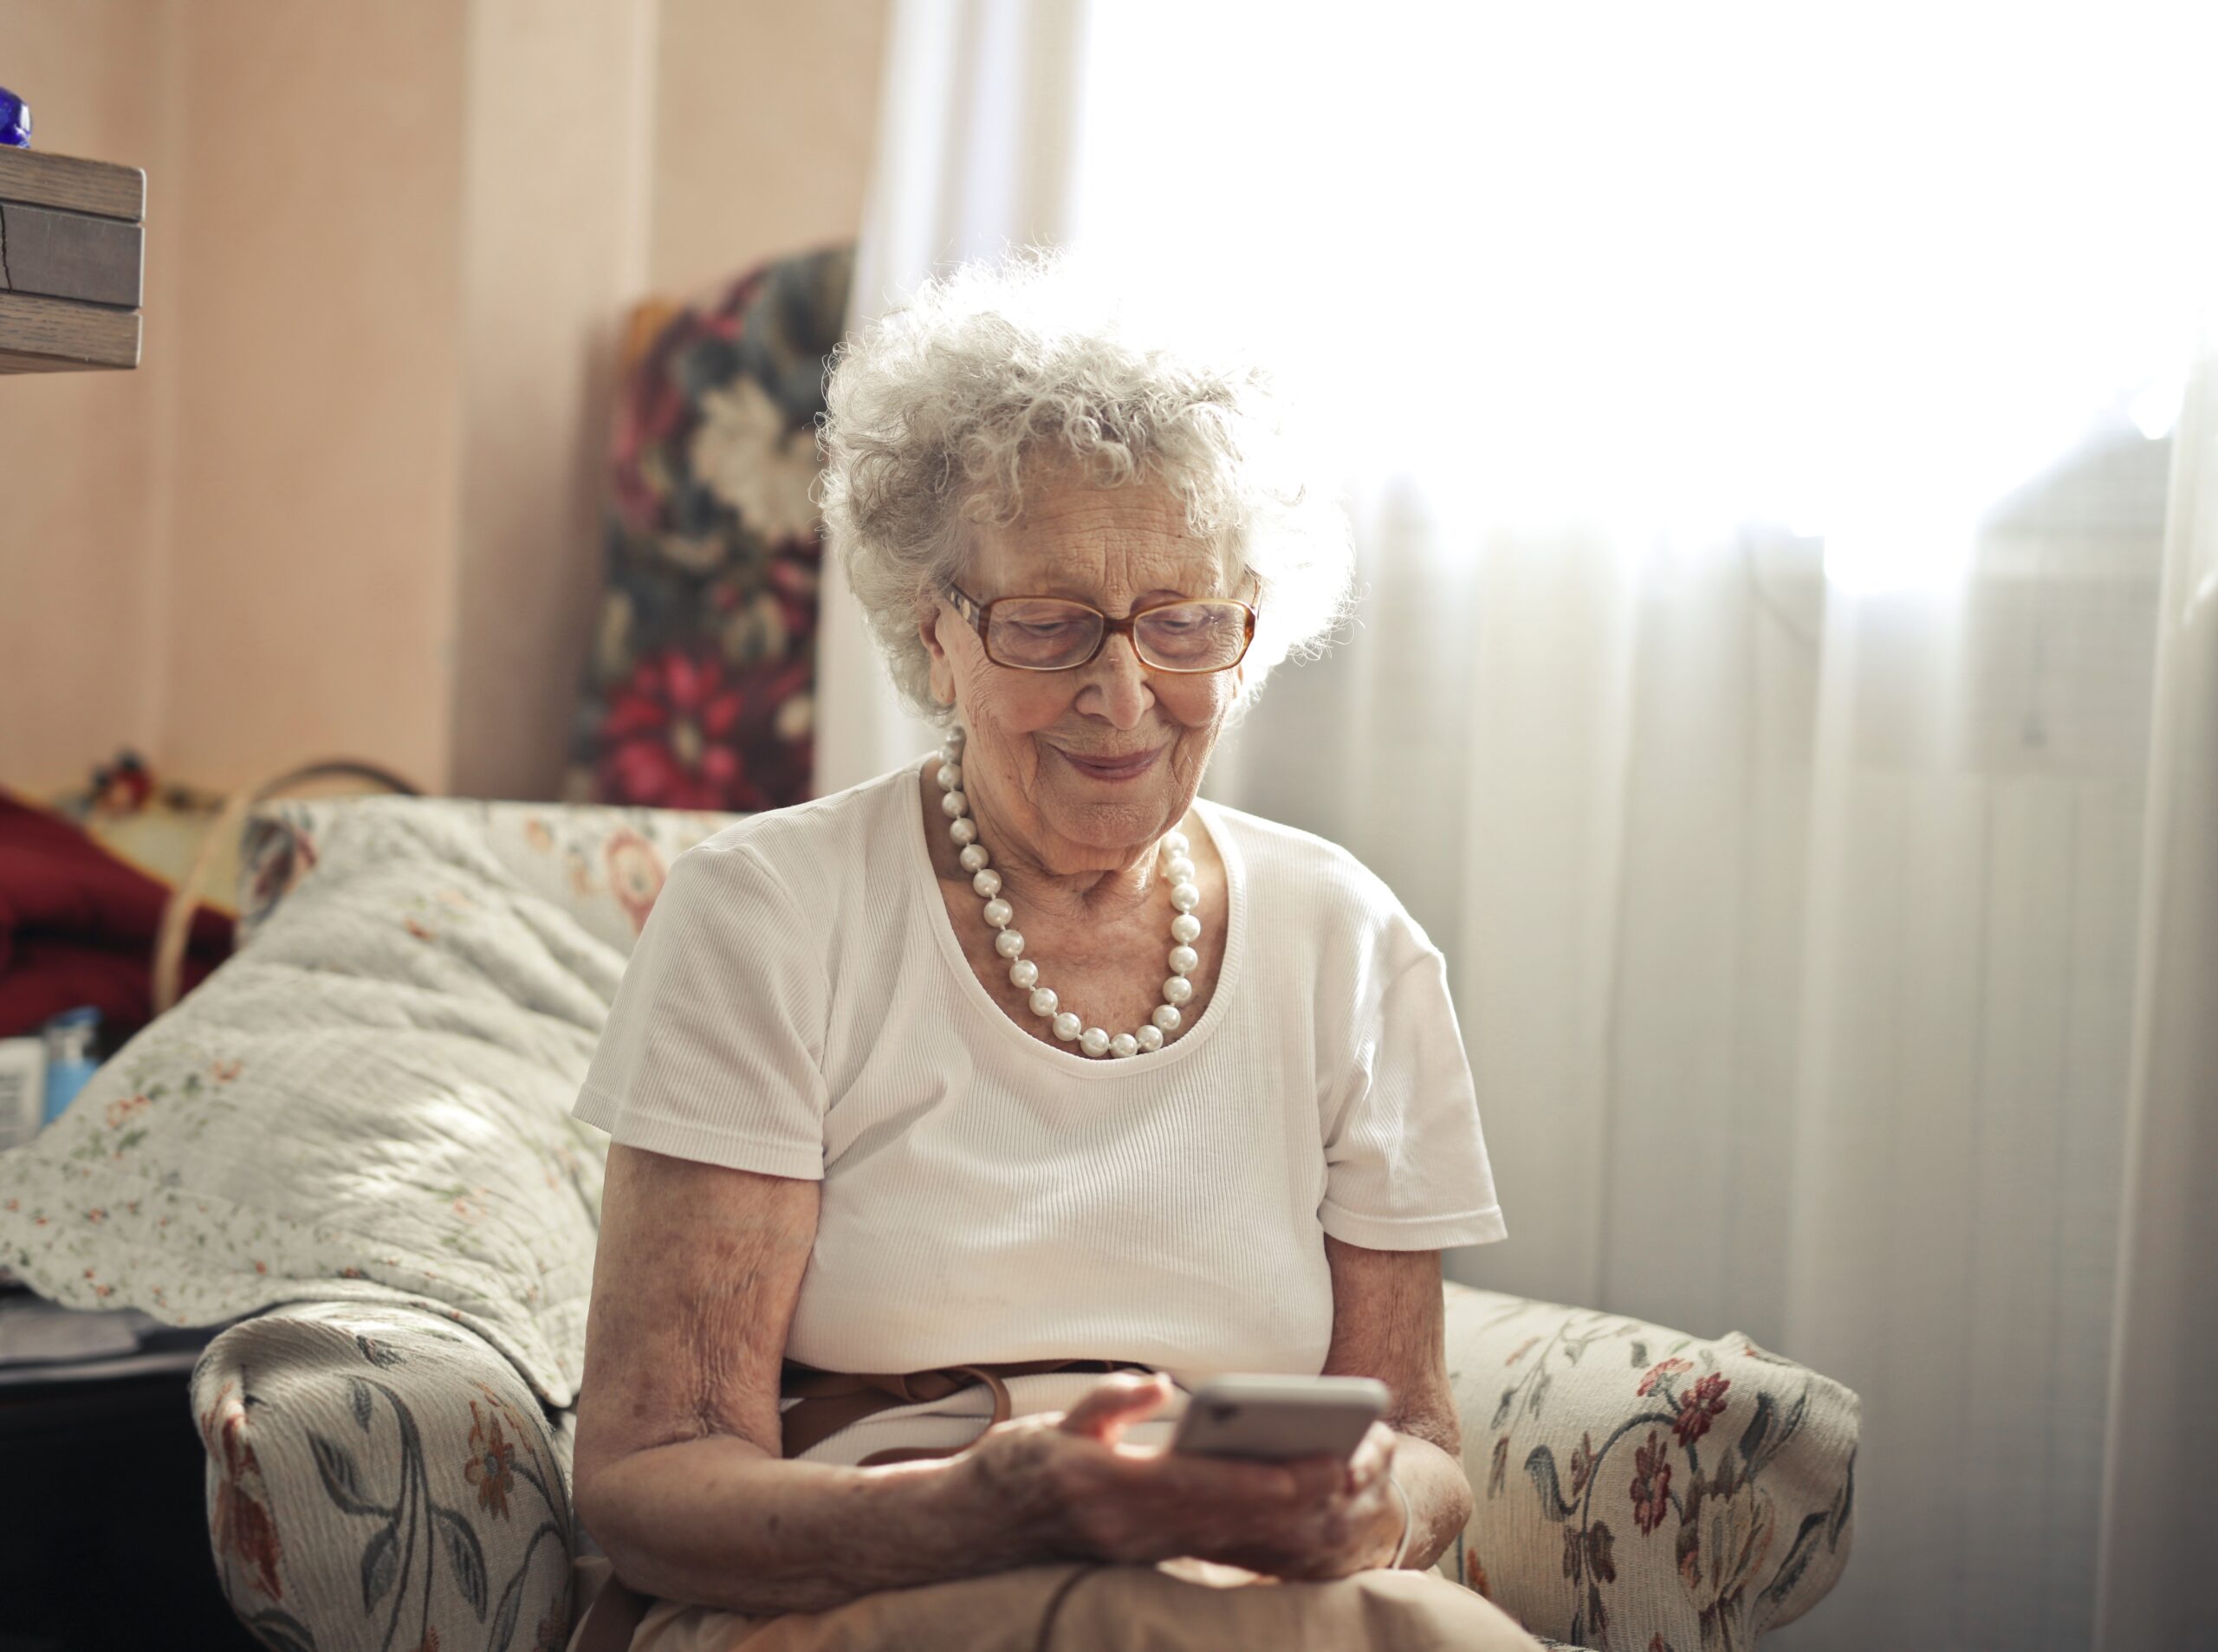 What are the alternatives to moving into a care home?